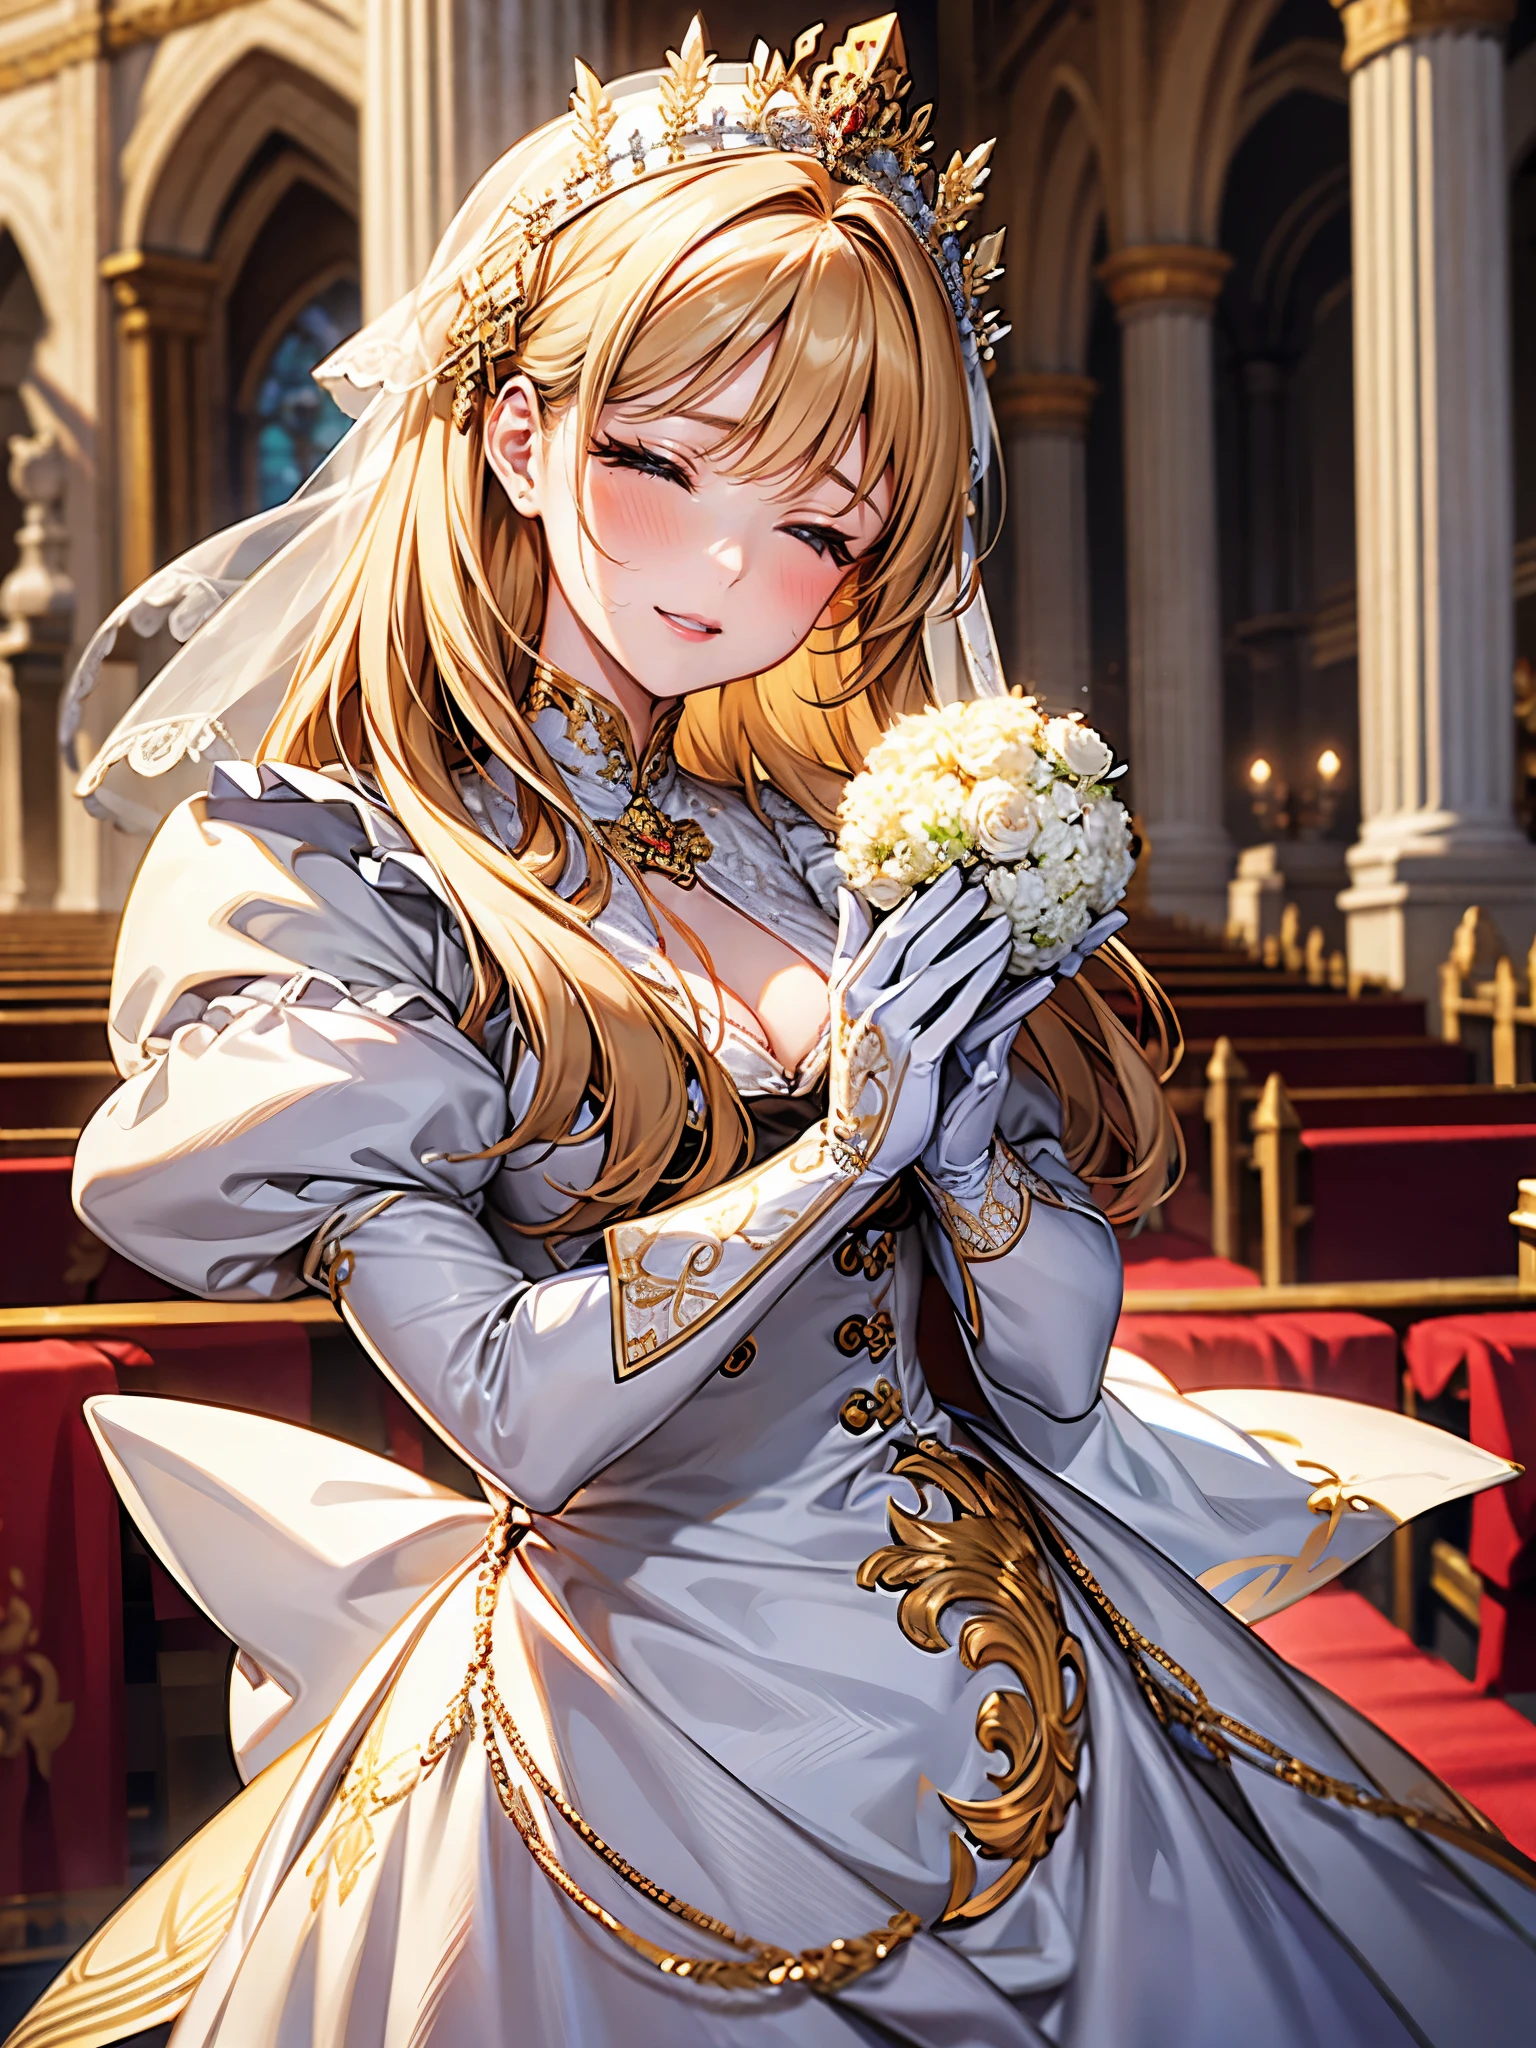 In front of the altar of a majestic church、（blurred background）、brighter light、golden long hair girl、classic white wedding dress、（elegant luster）、（lots of races）、lots of ribbons、((voluminous puff sleeves))、long cuffs with many buttons、golden embroidery、long train、White embroidered gloves、five fingers、laughter、redness of cheeks